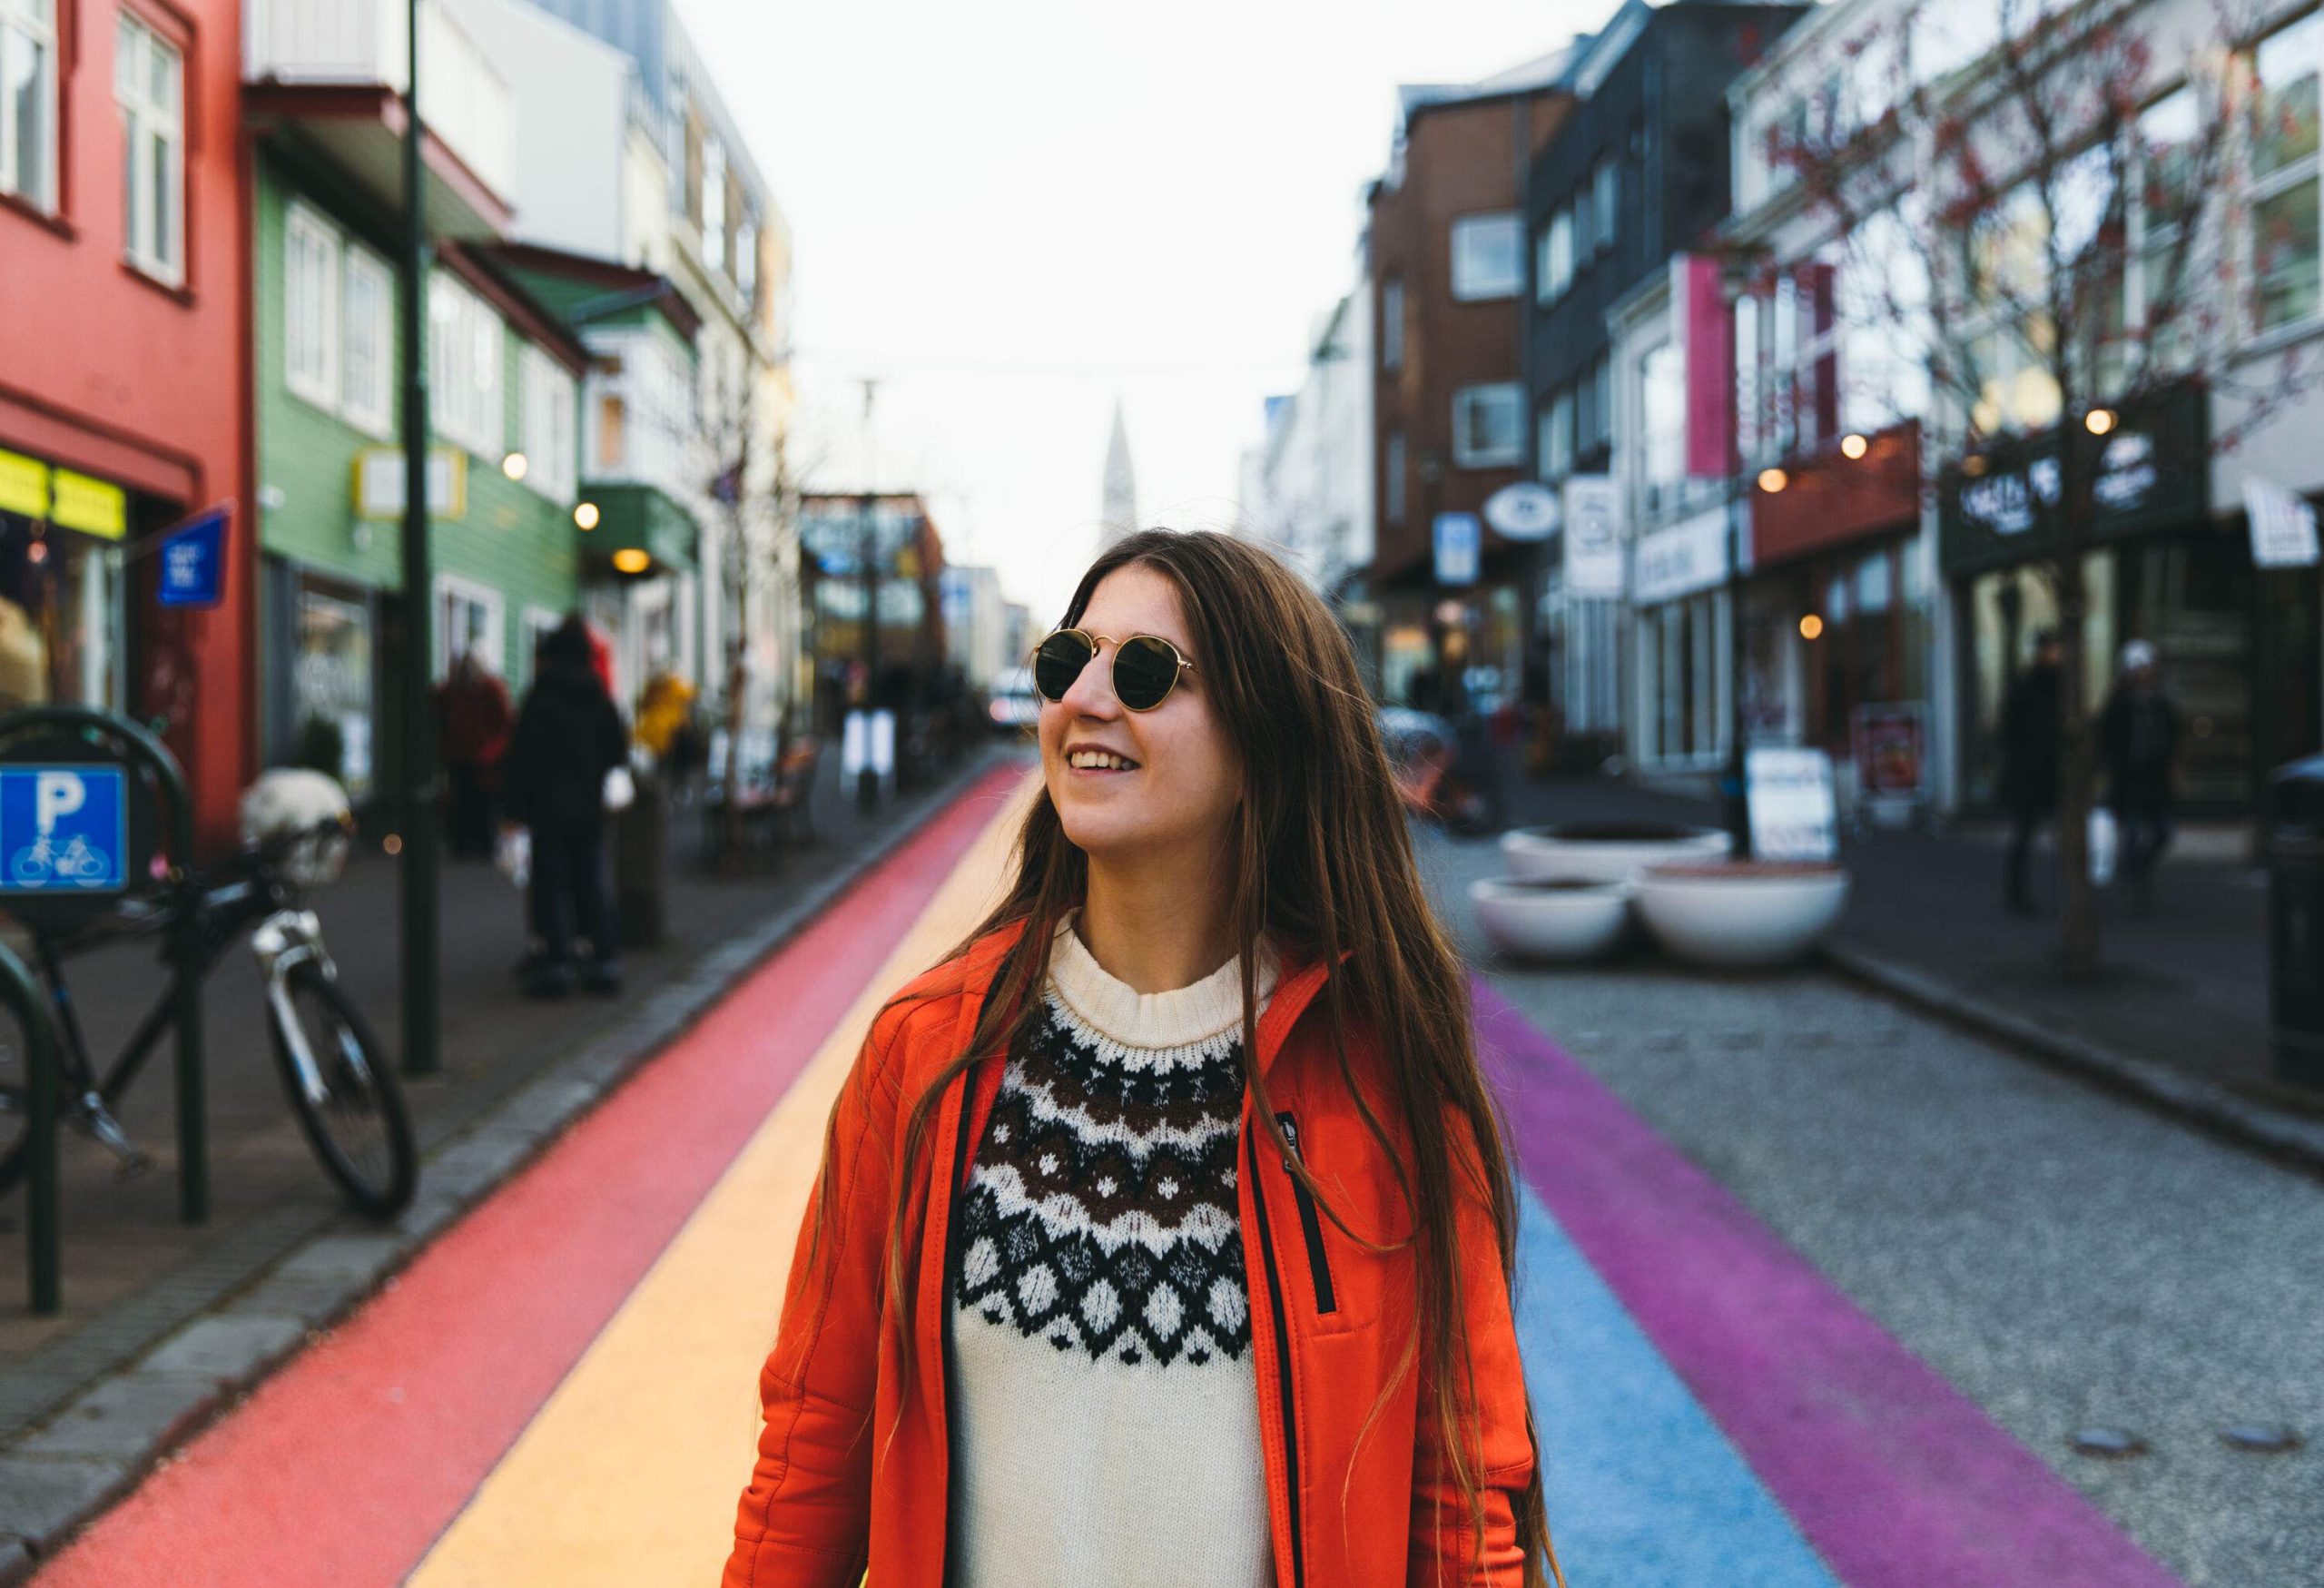 A long-haired woman walking through the colourful streets, wearing a red jacket, knitted sweater, and sunglasses.